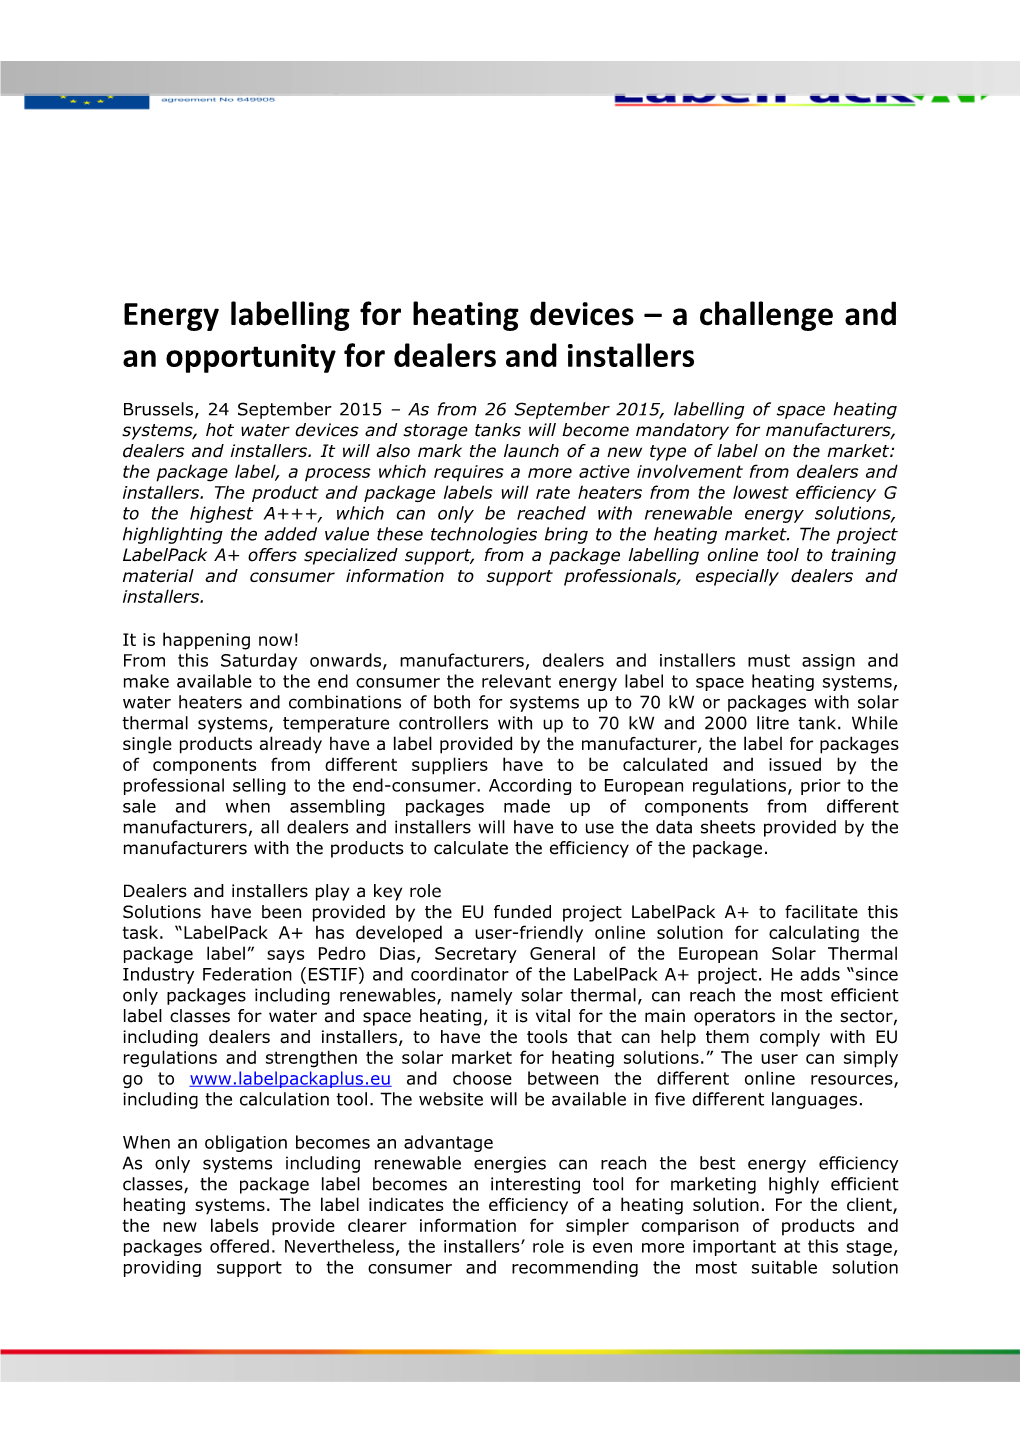 Energy Labelling for Heating Devices a Challenge and an Opportunity for Dealers and Installers